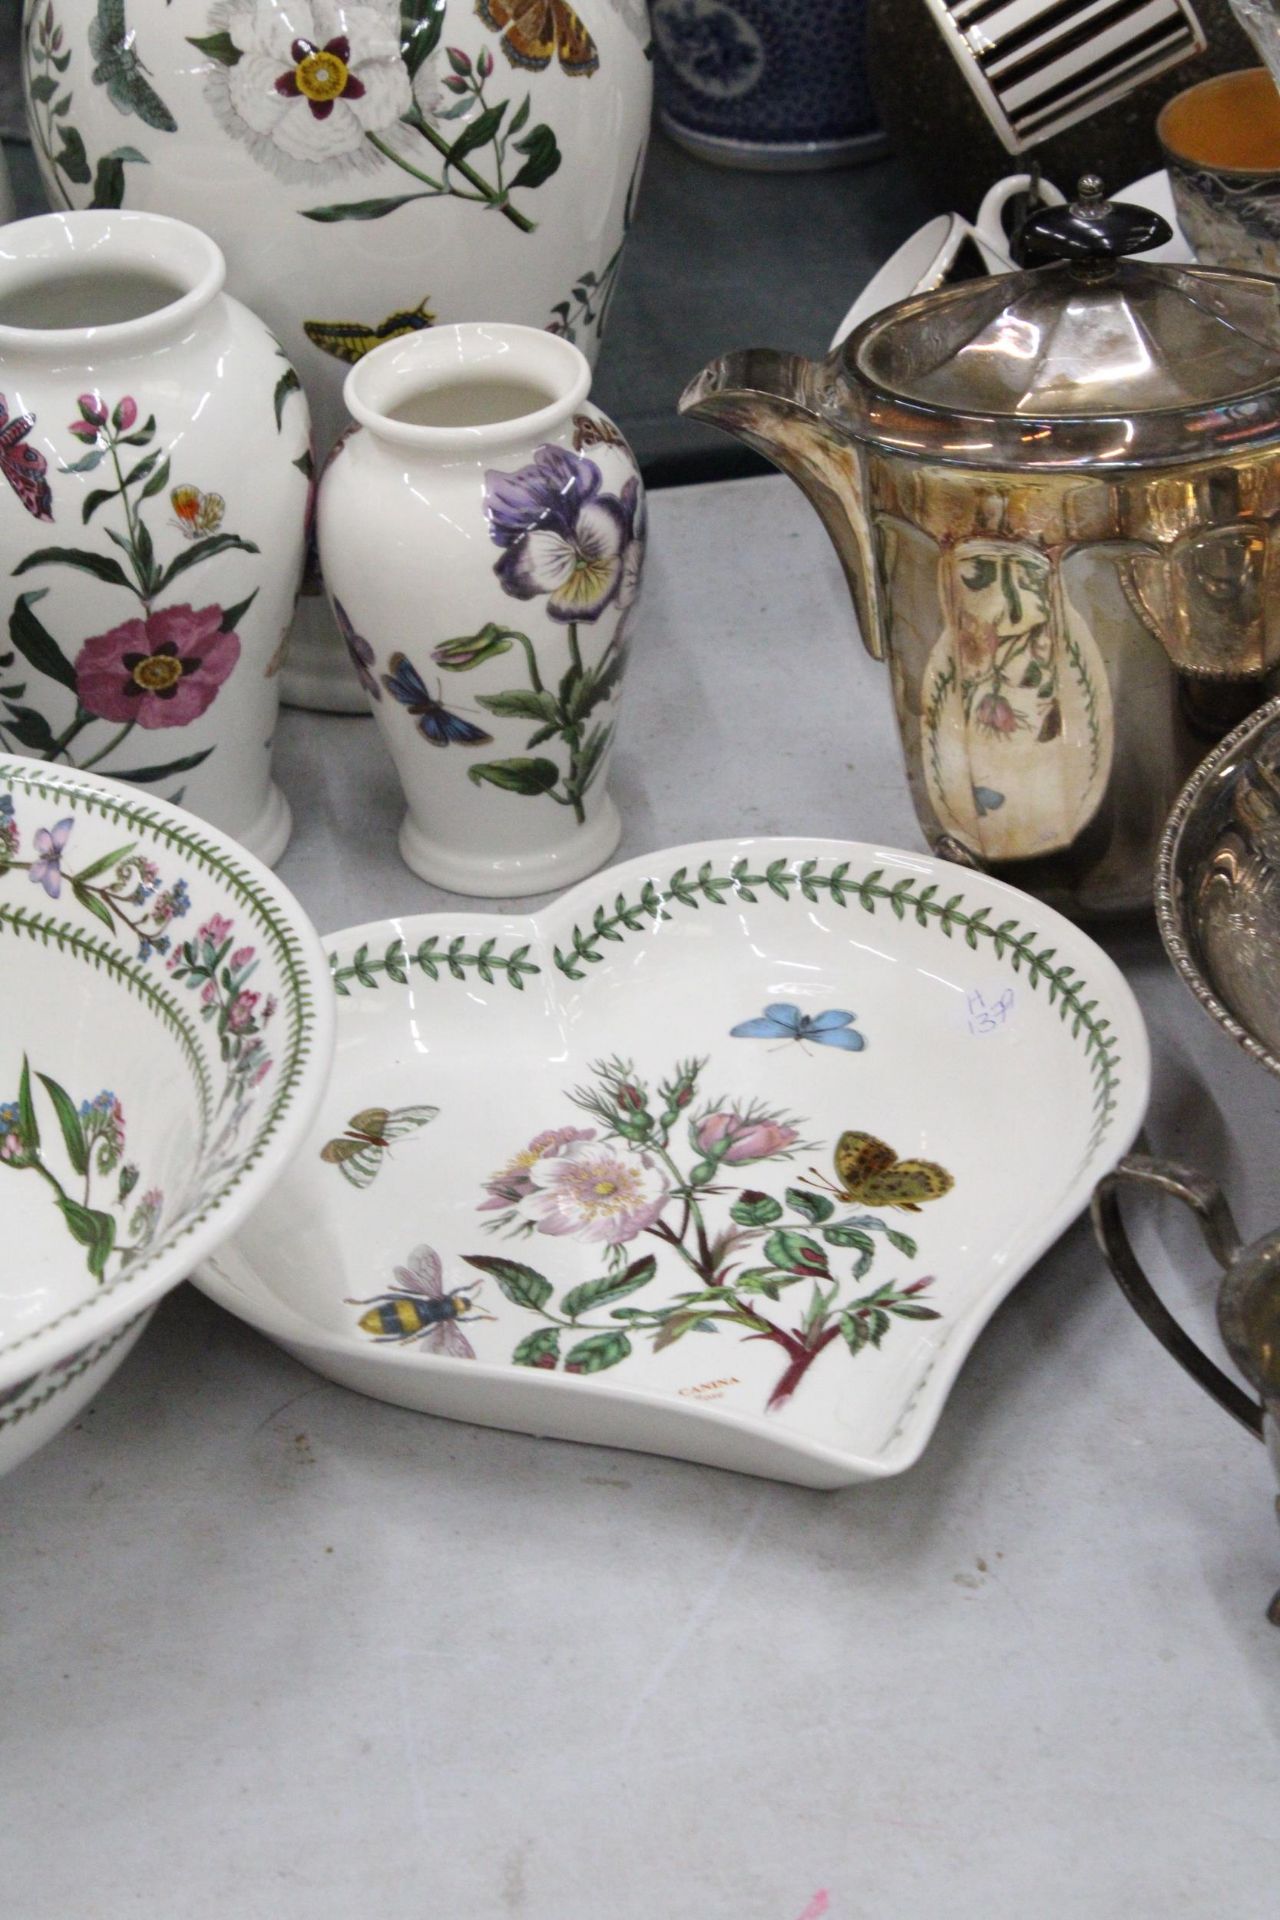 A COLLECTION OF PORTMEIRION TO INCLUDE LARGE VASES, SMALLER VASES, A LARGE BOWL, HEART SHAPED - Image 4 of 6